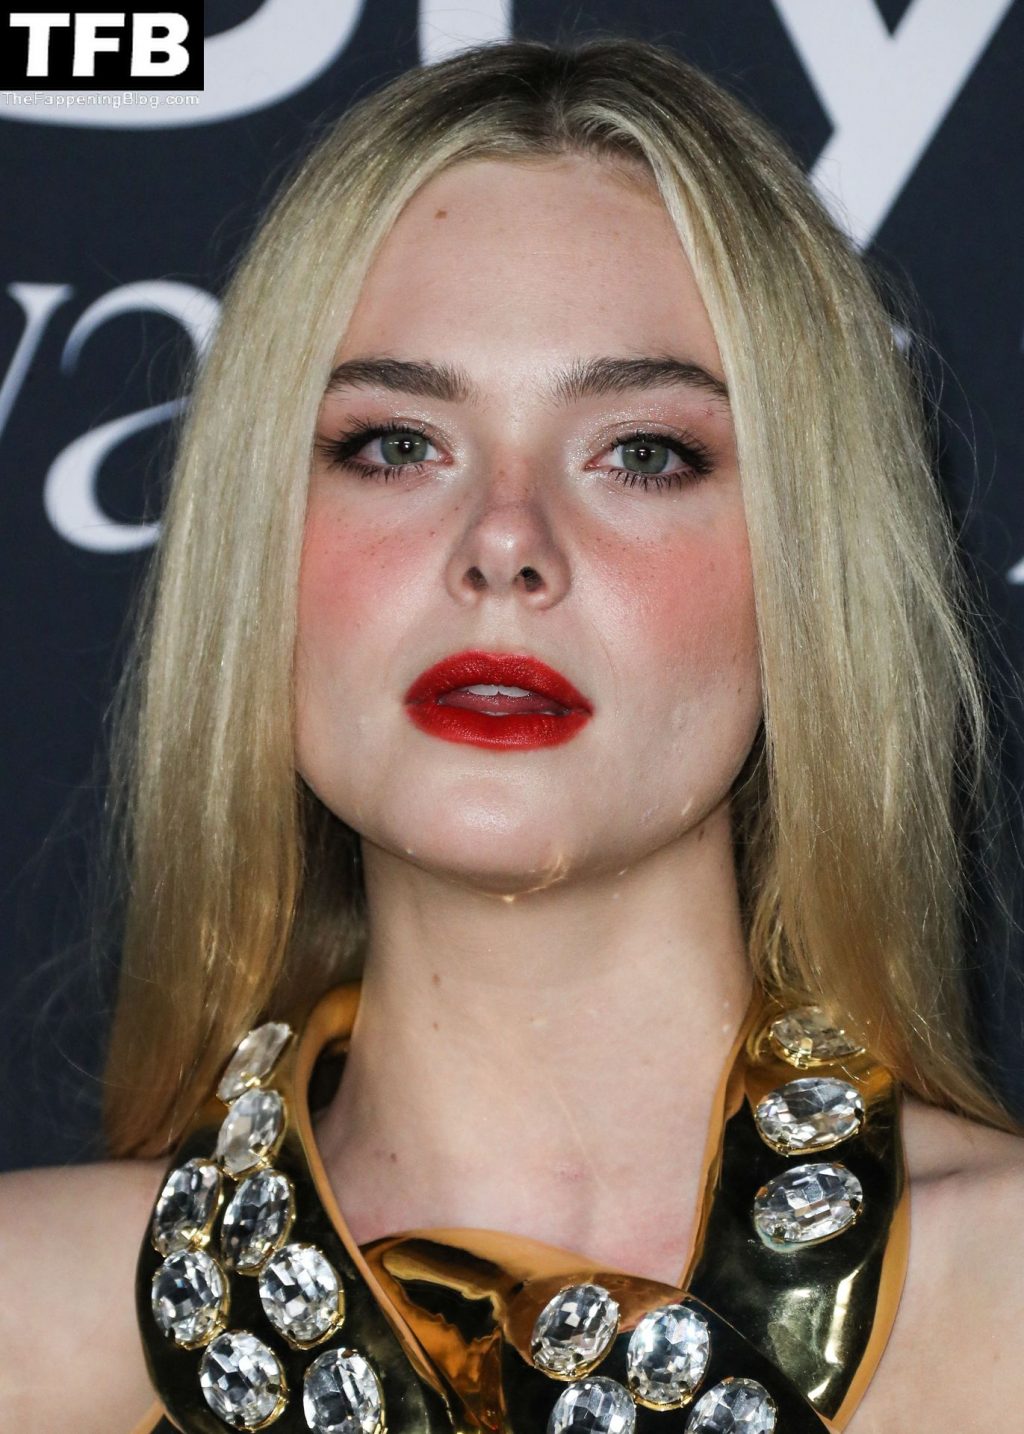 Elle Fanning Shows Plenty of Midriff as She Poses at the 6th Annual InStyle Awards (106 Photos)